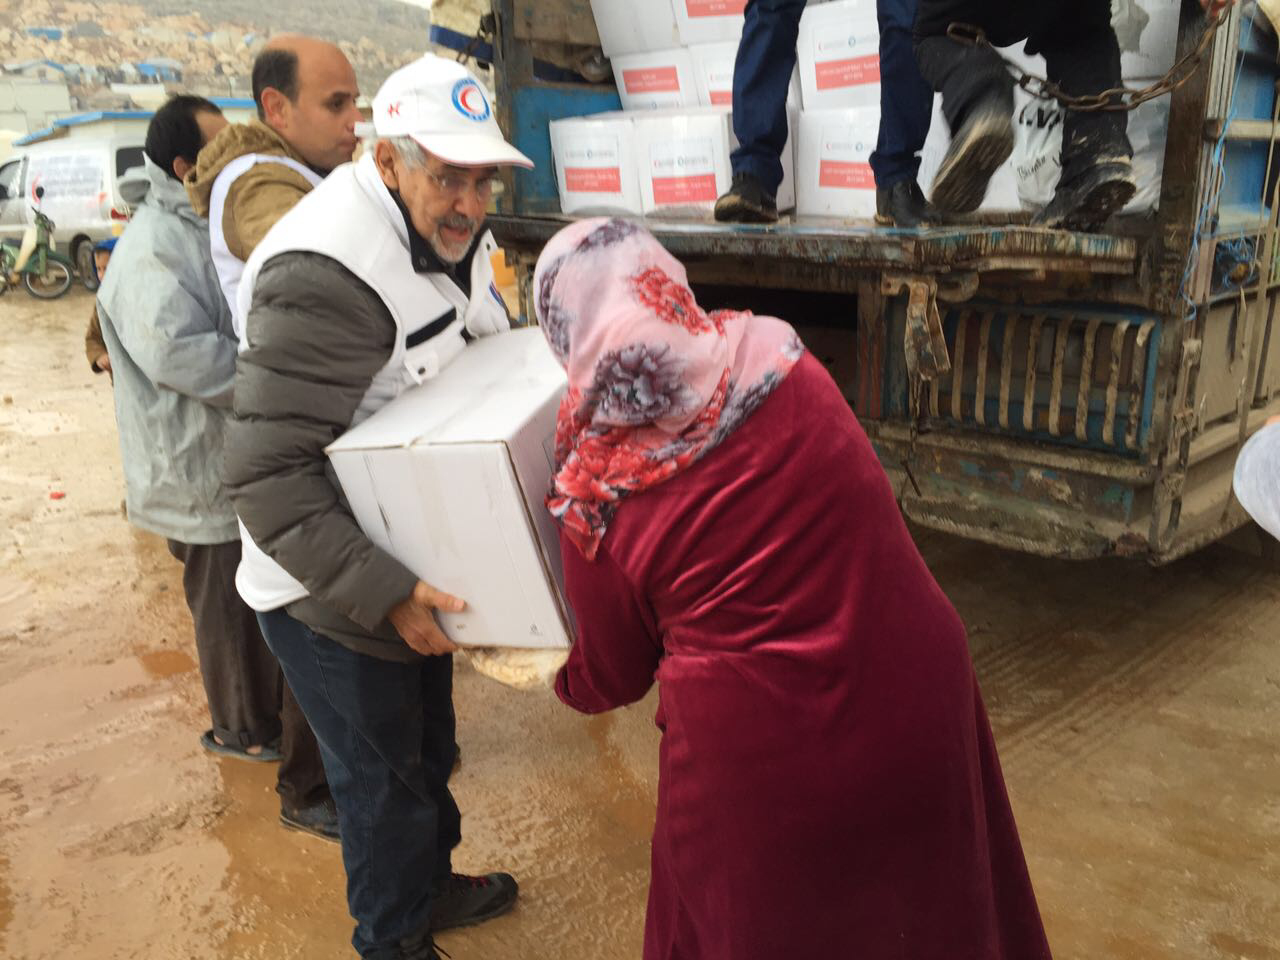 Kuwait Red Crescent Society Chairman Dr. Hilal Al-Sayer distributes relief aid to the Syrian refugees in Turkey